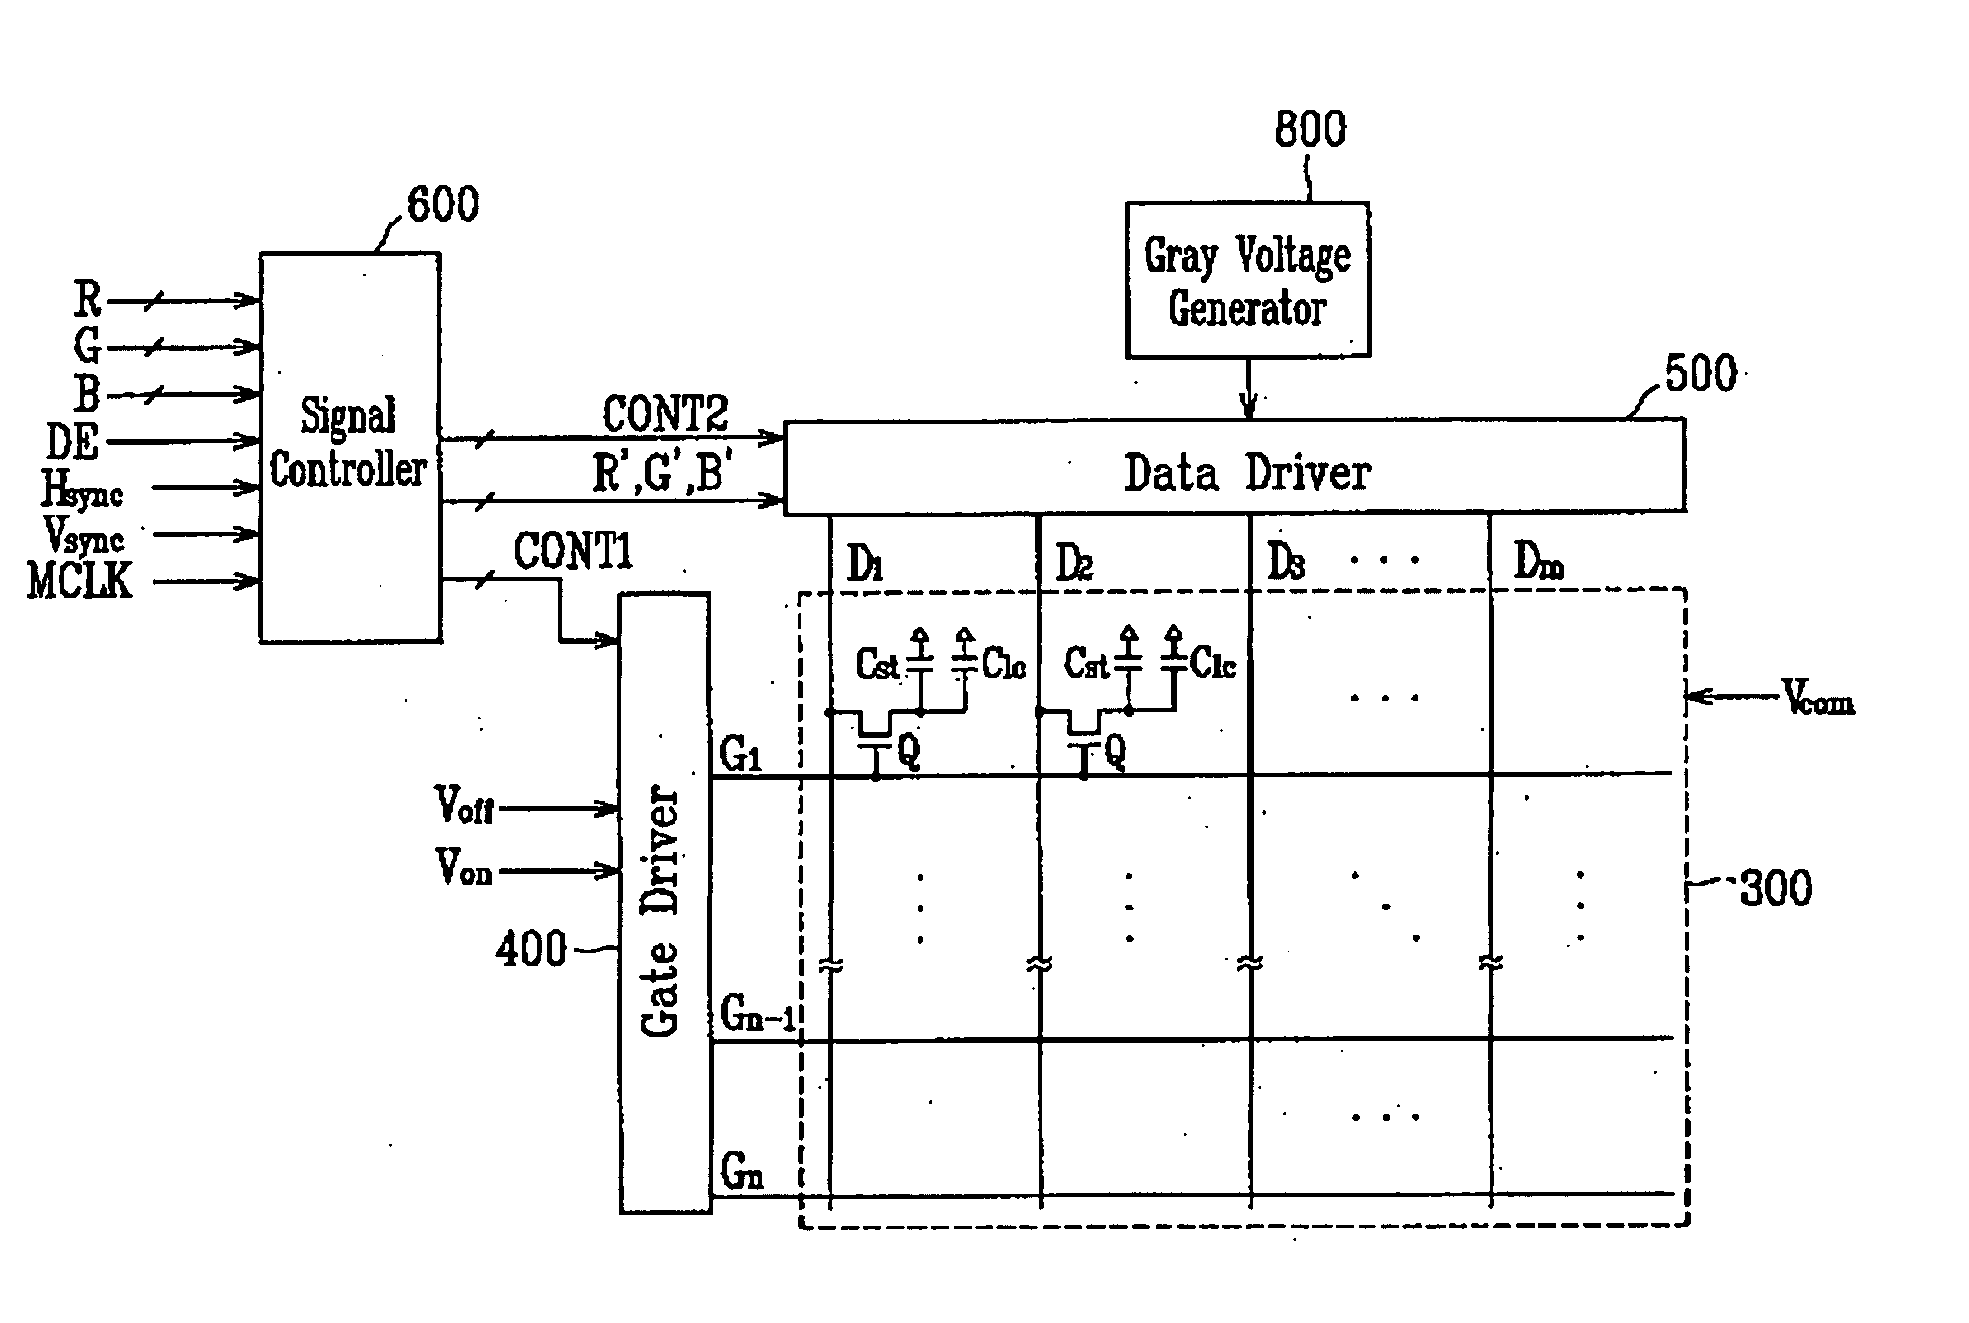 Modifying gray voltage signals in a display device